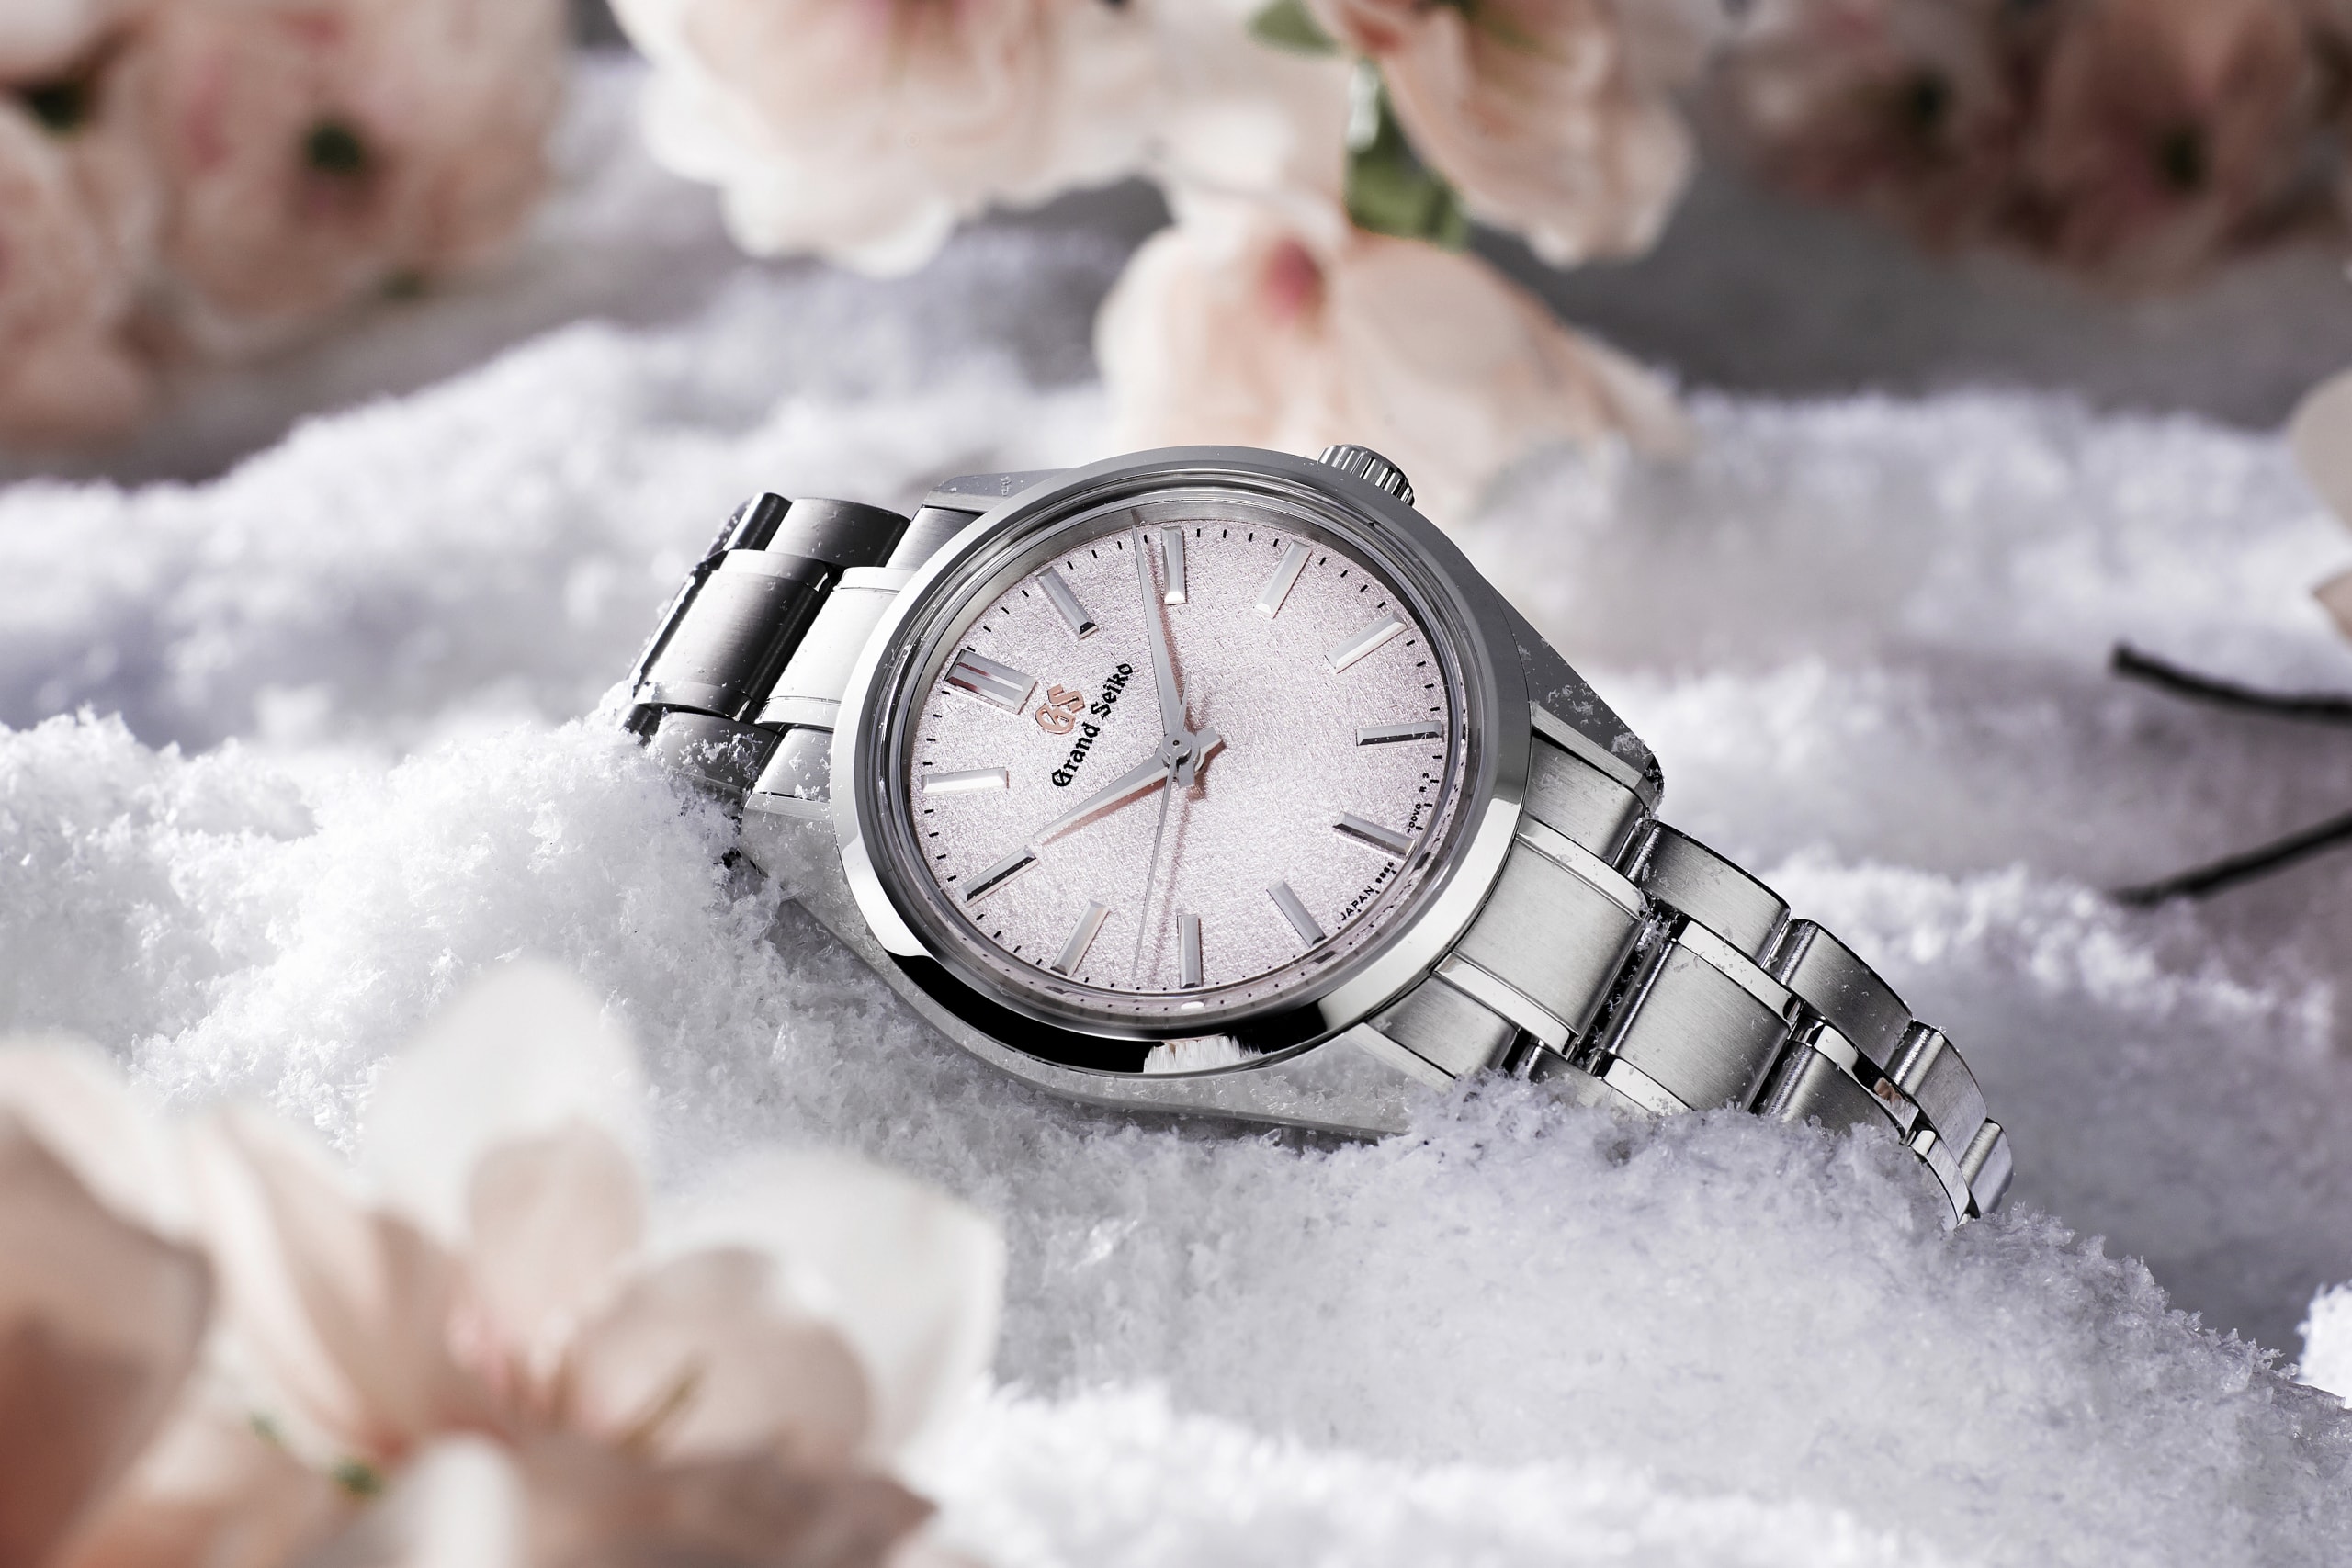 Grand Seiko Celebrates 55 Years of 44GS House Style With Slim Manual Winder Inspired by Japan in Springtime